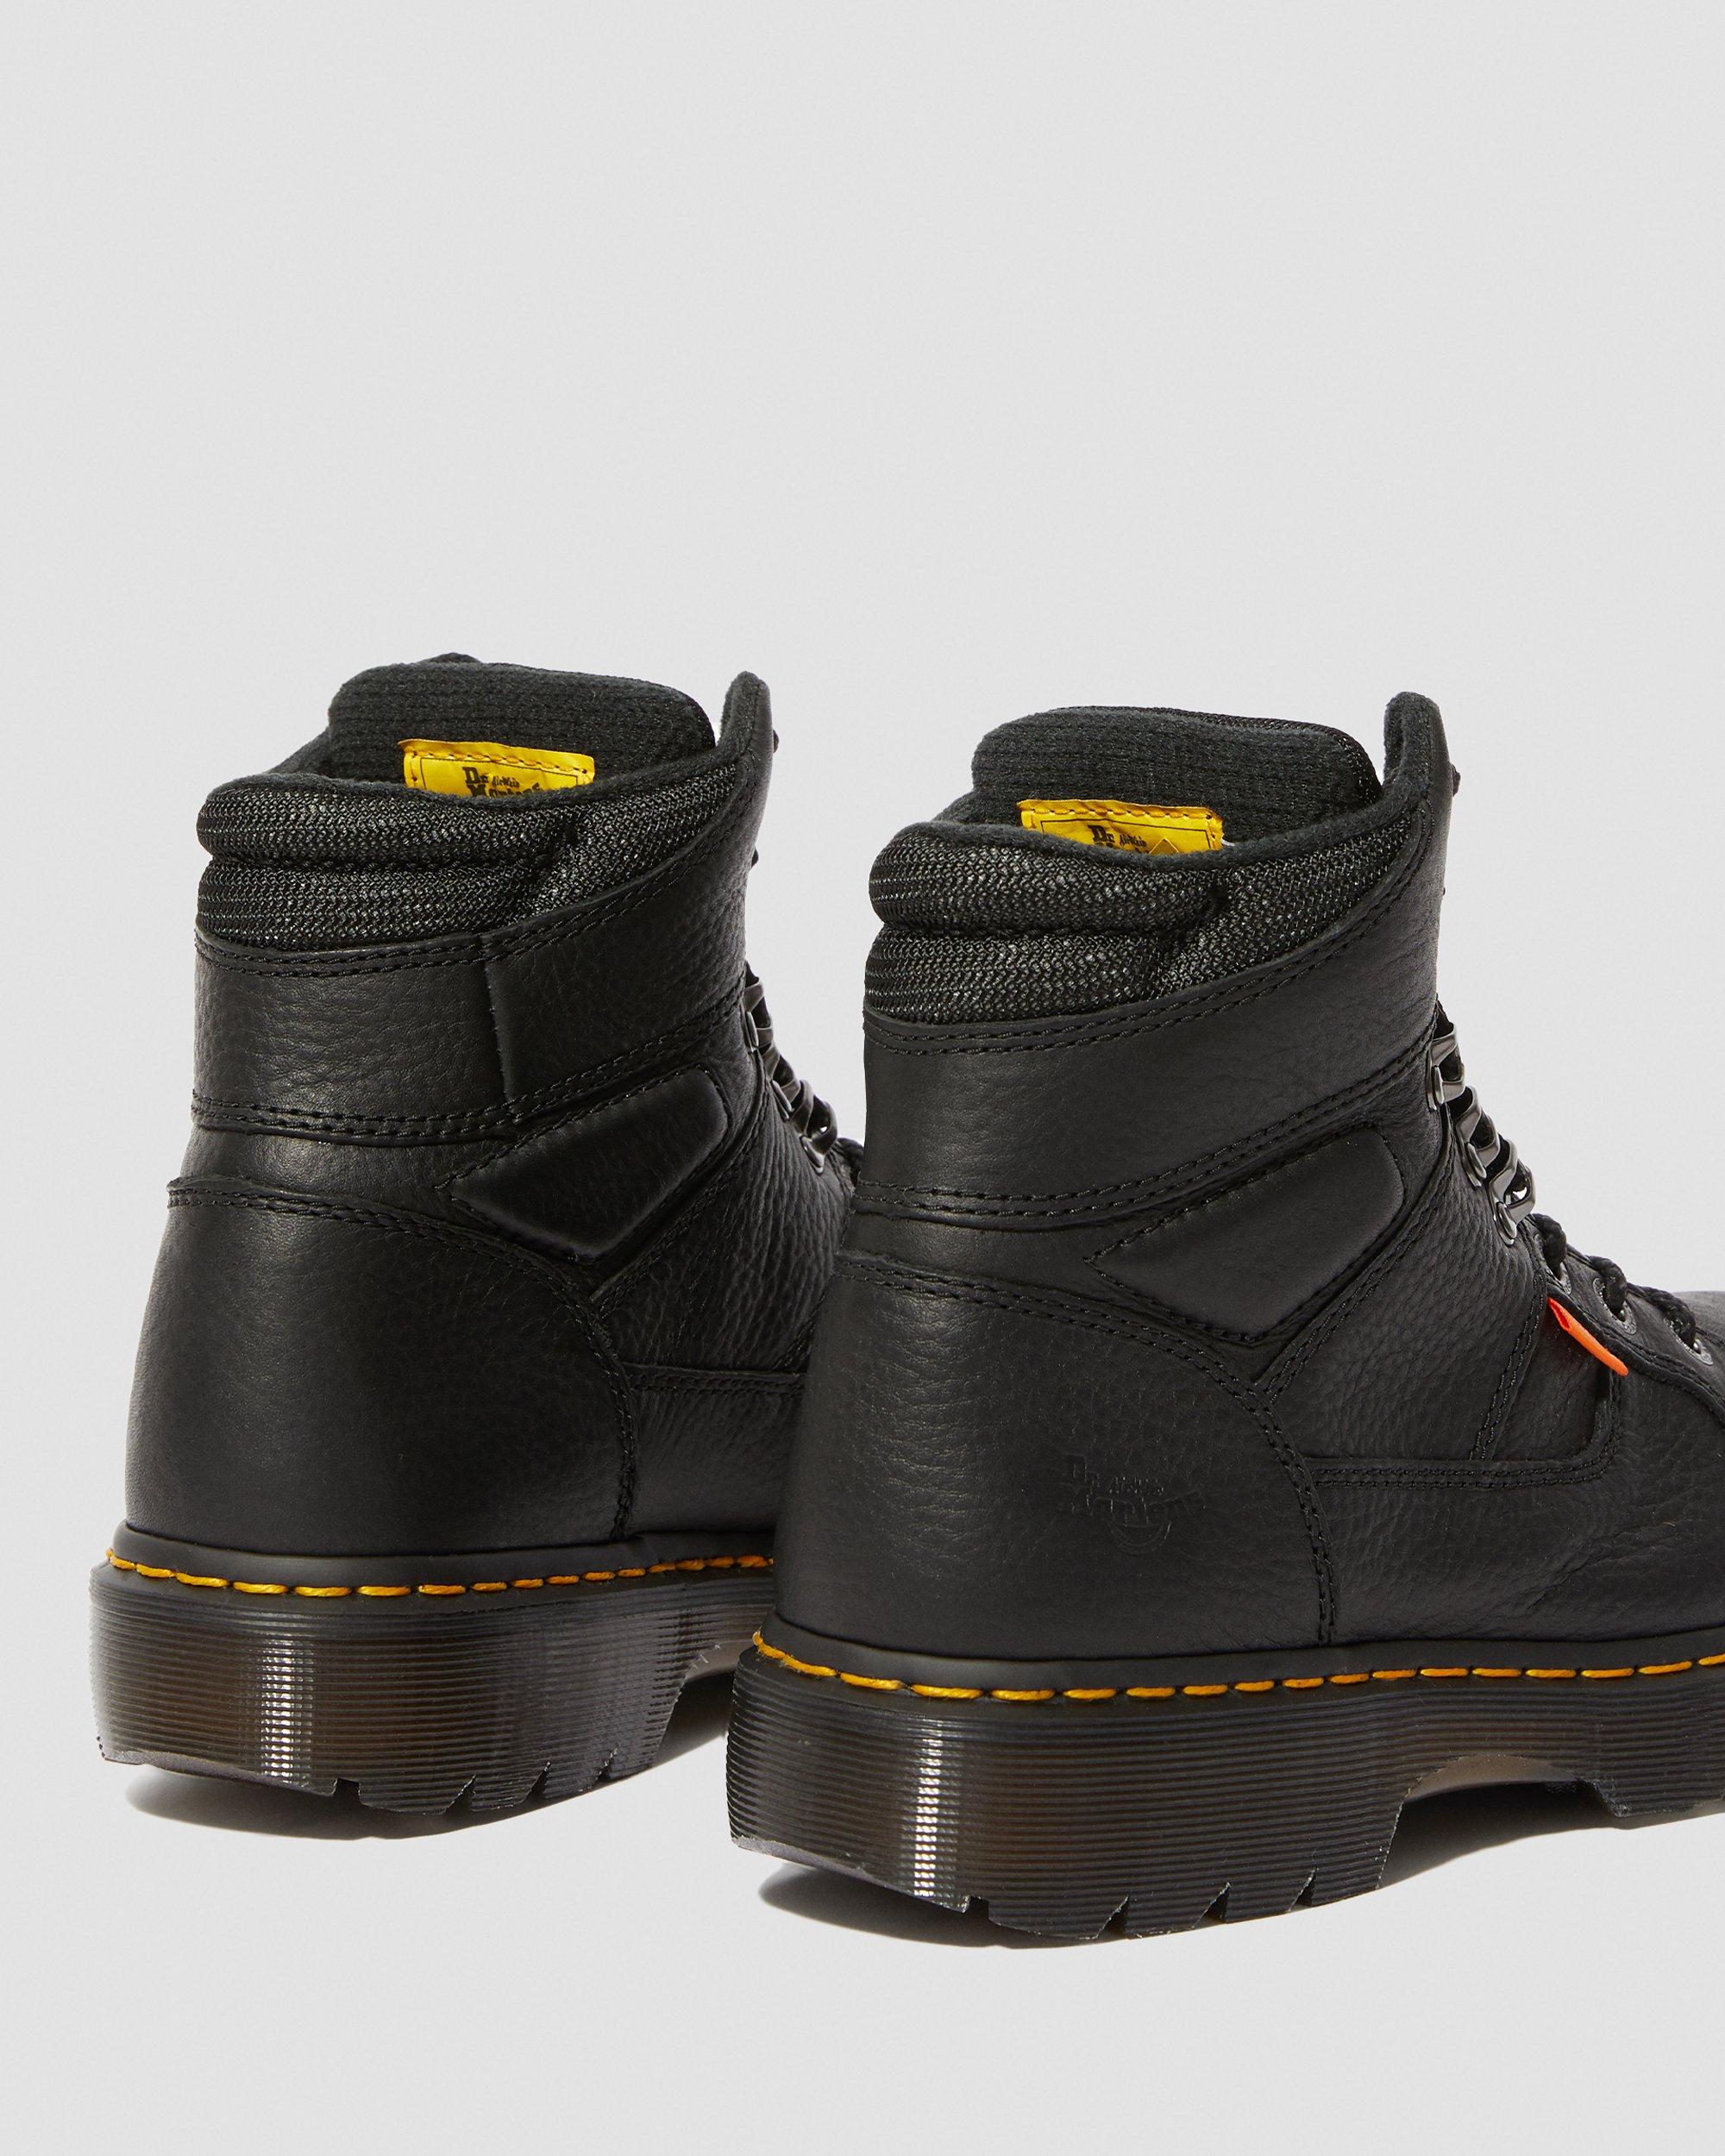 Ironbridge Extra Wide Grizzly Met Guard Work Boots Dr. Martens